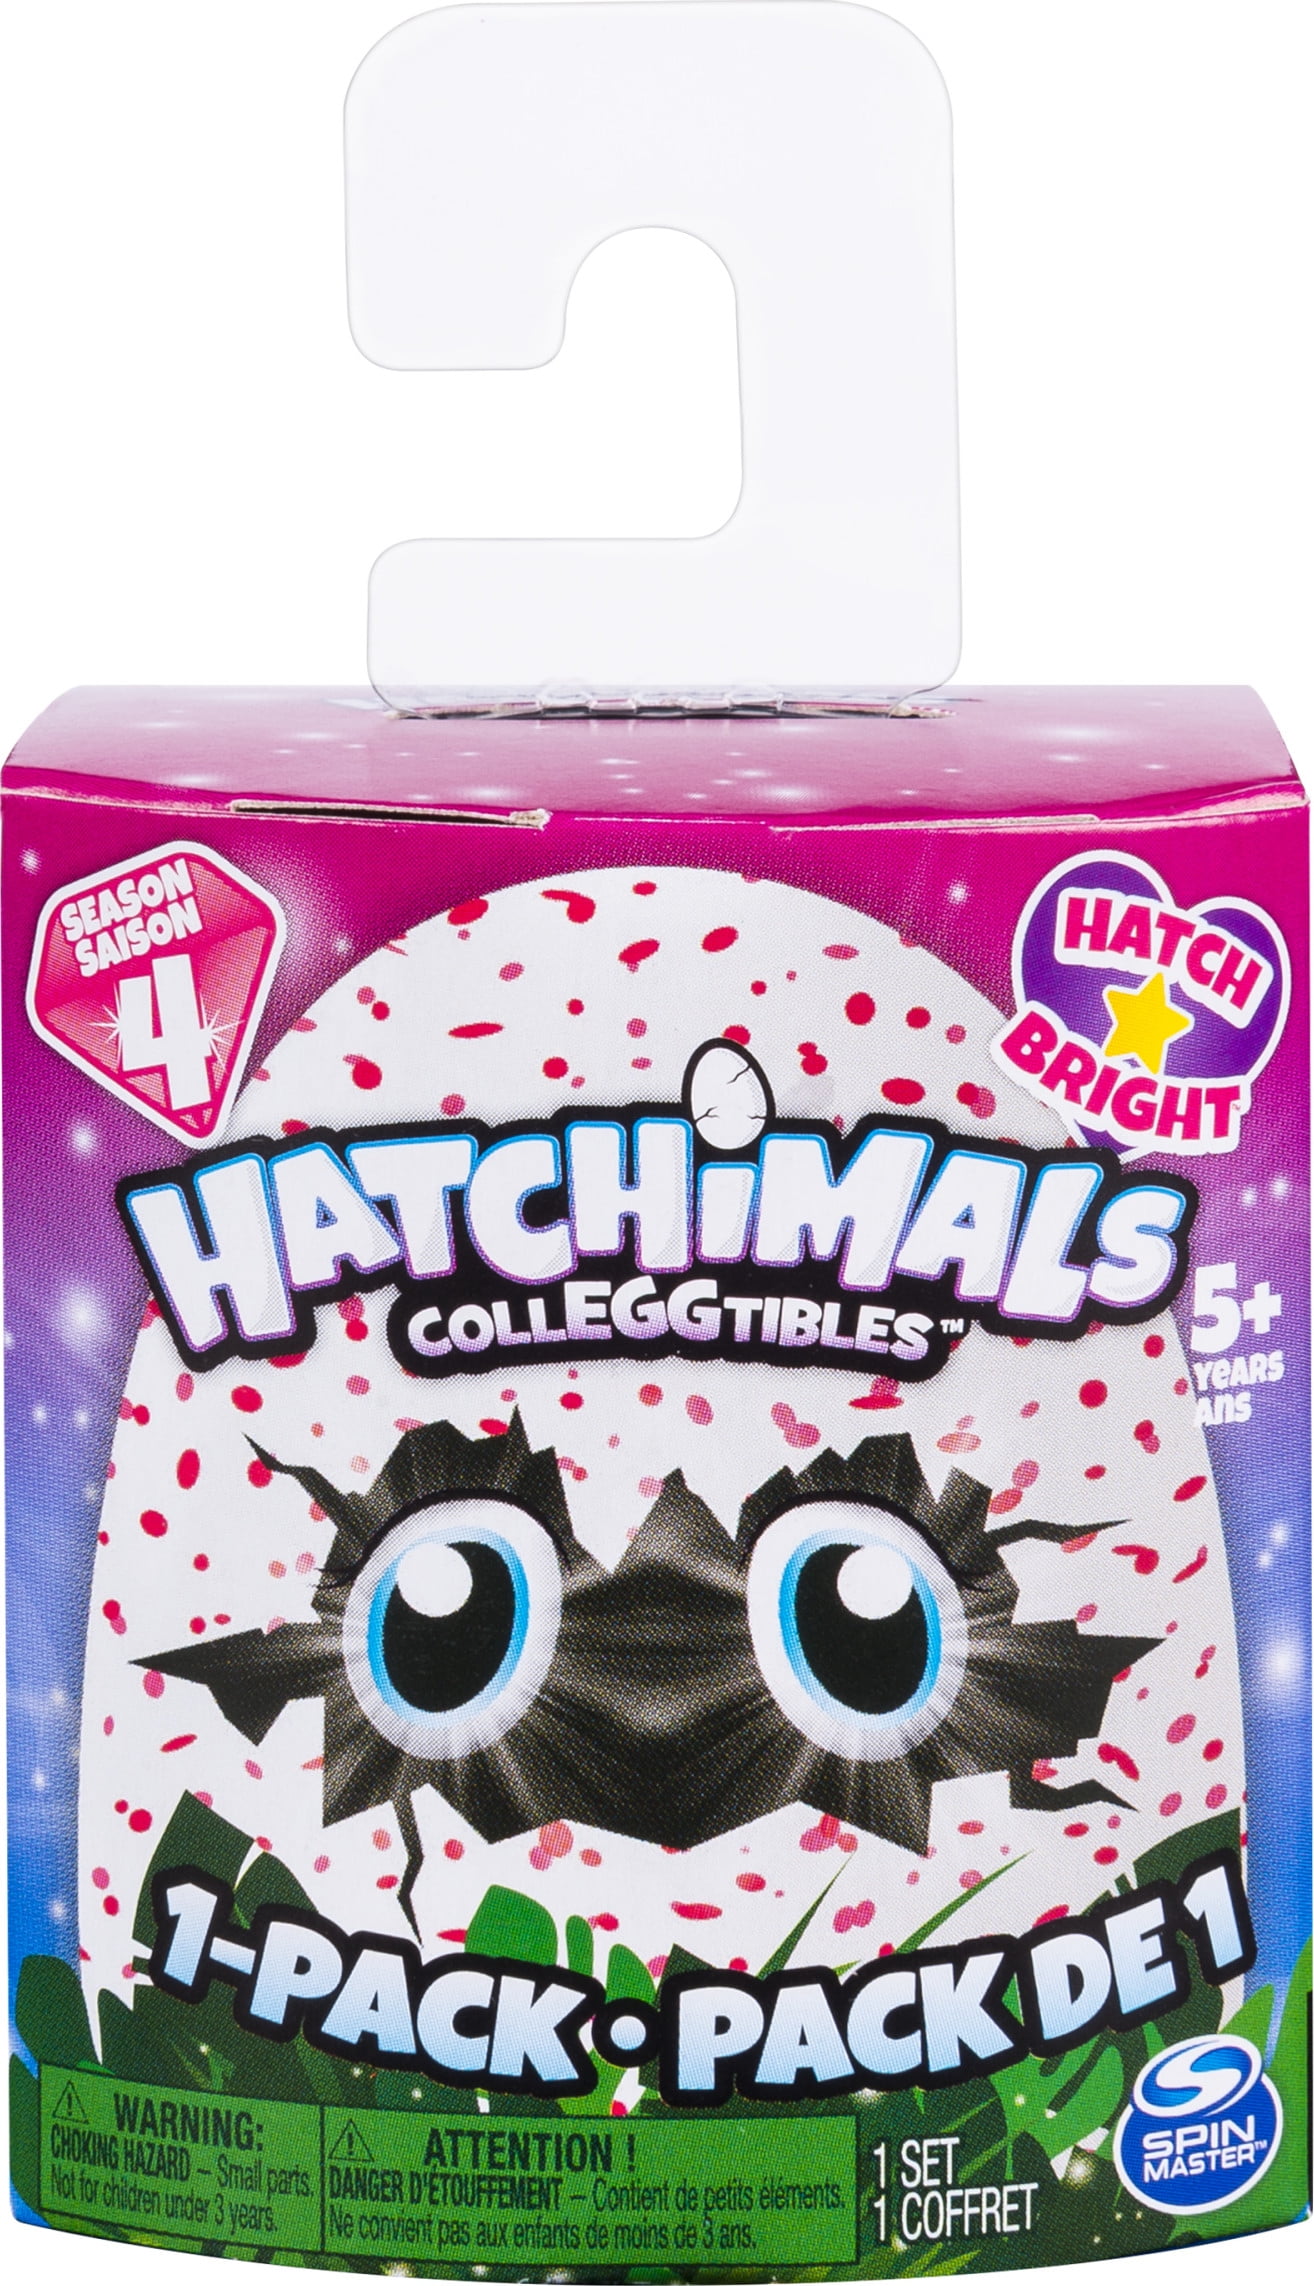 Hatchimals Colleggtibles Hatch Bright Mystery and Nest Season 4 for sale online 